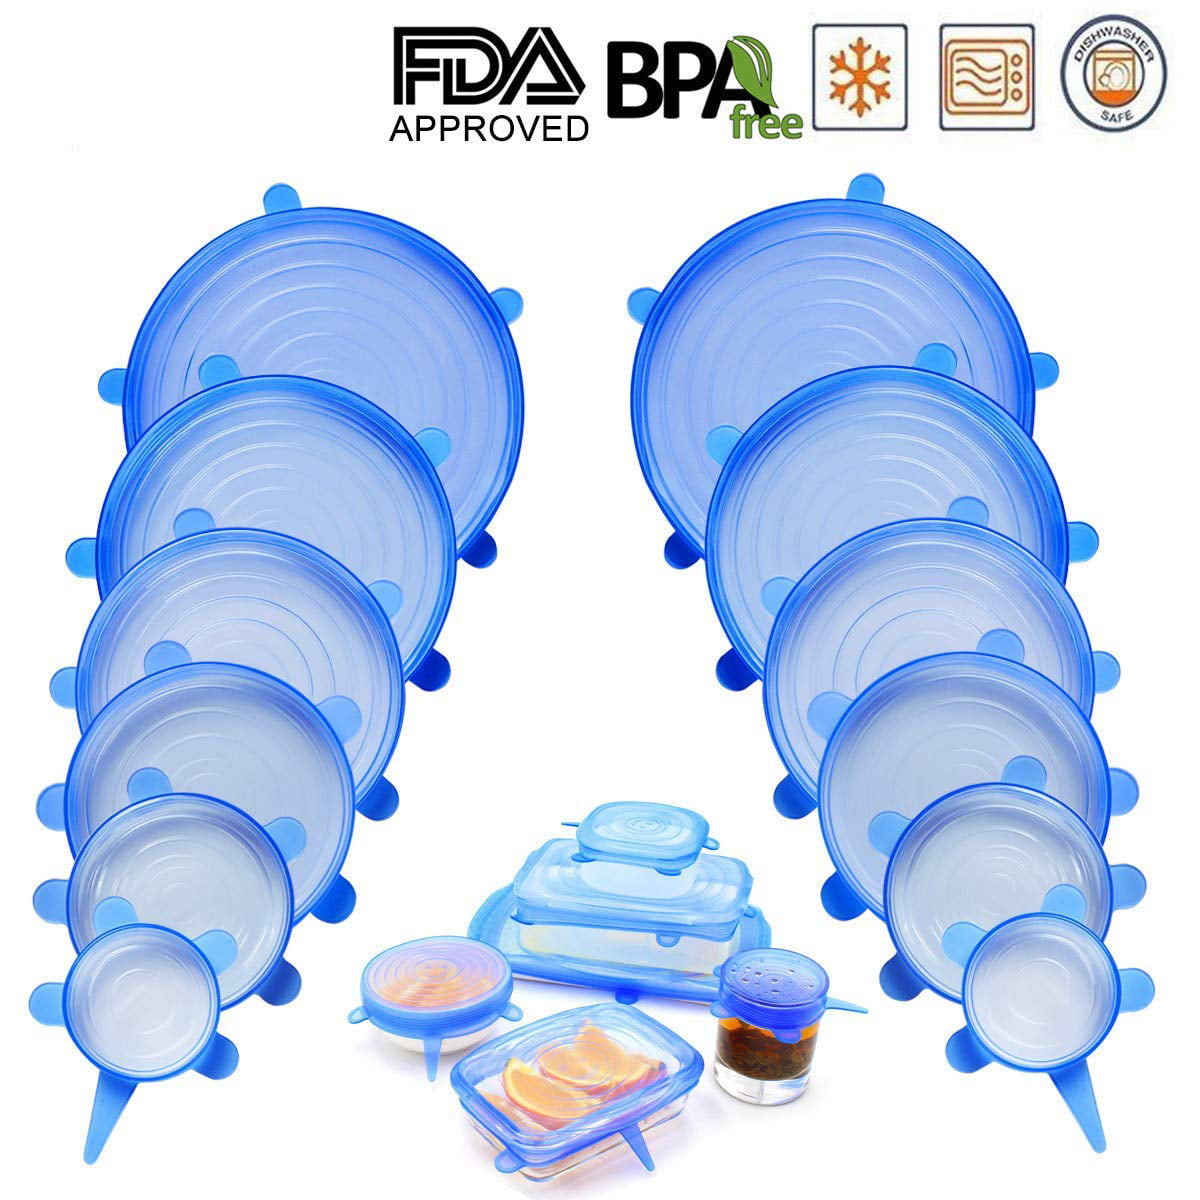 Wrap Seal Silicone Fresh Food Storage Stretch lids FDA approved material Cover F 